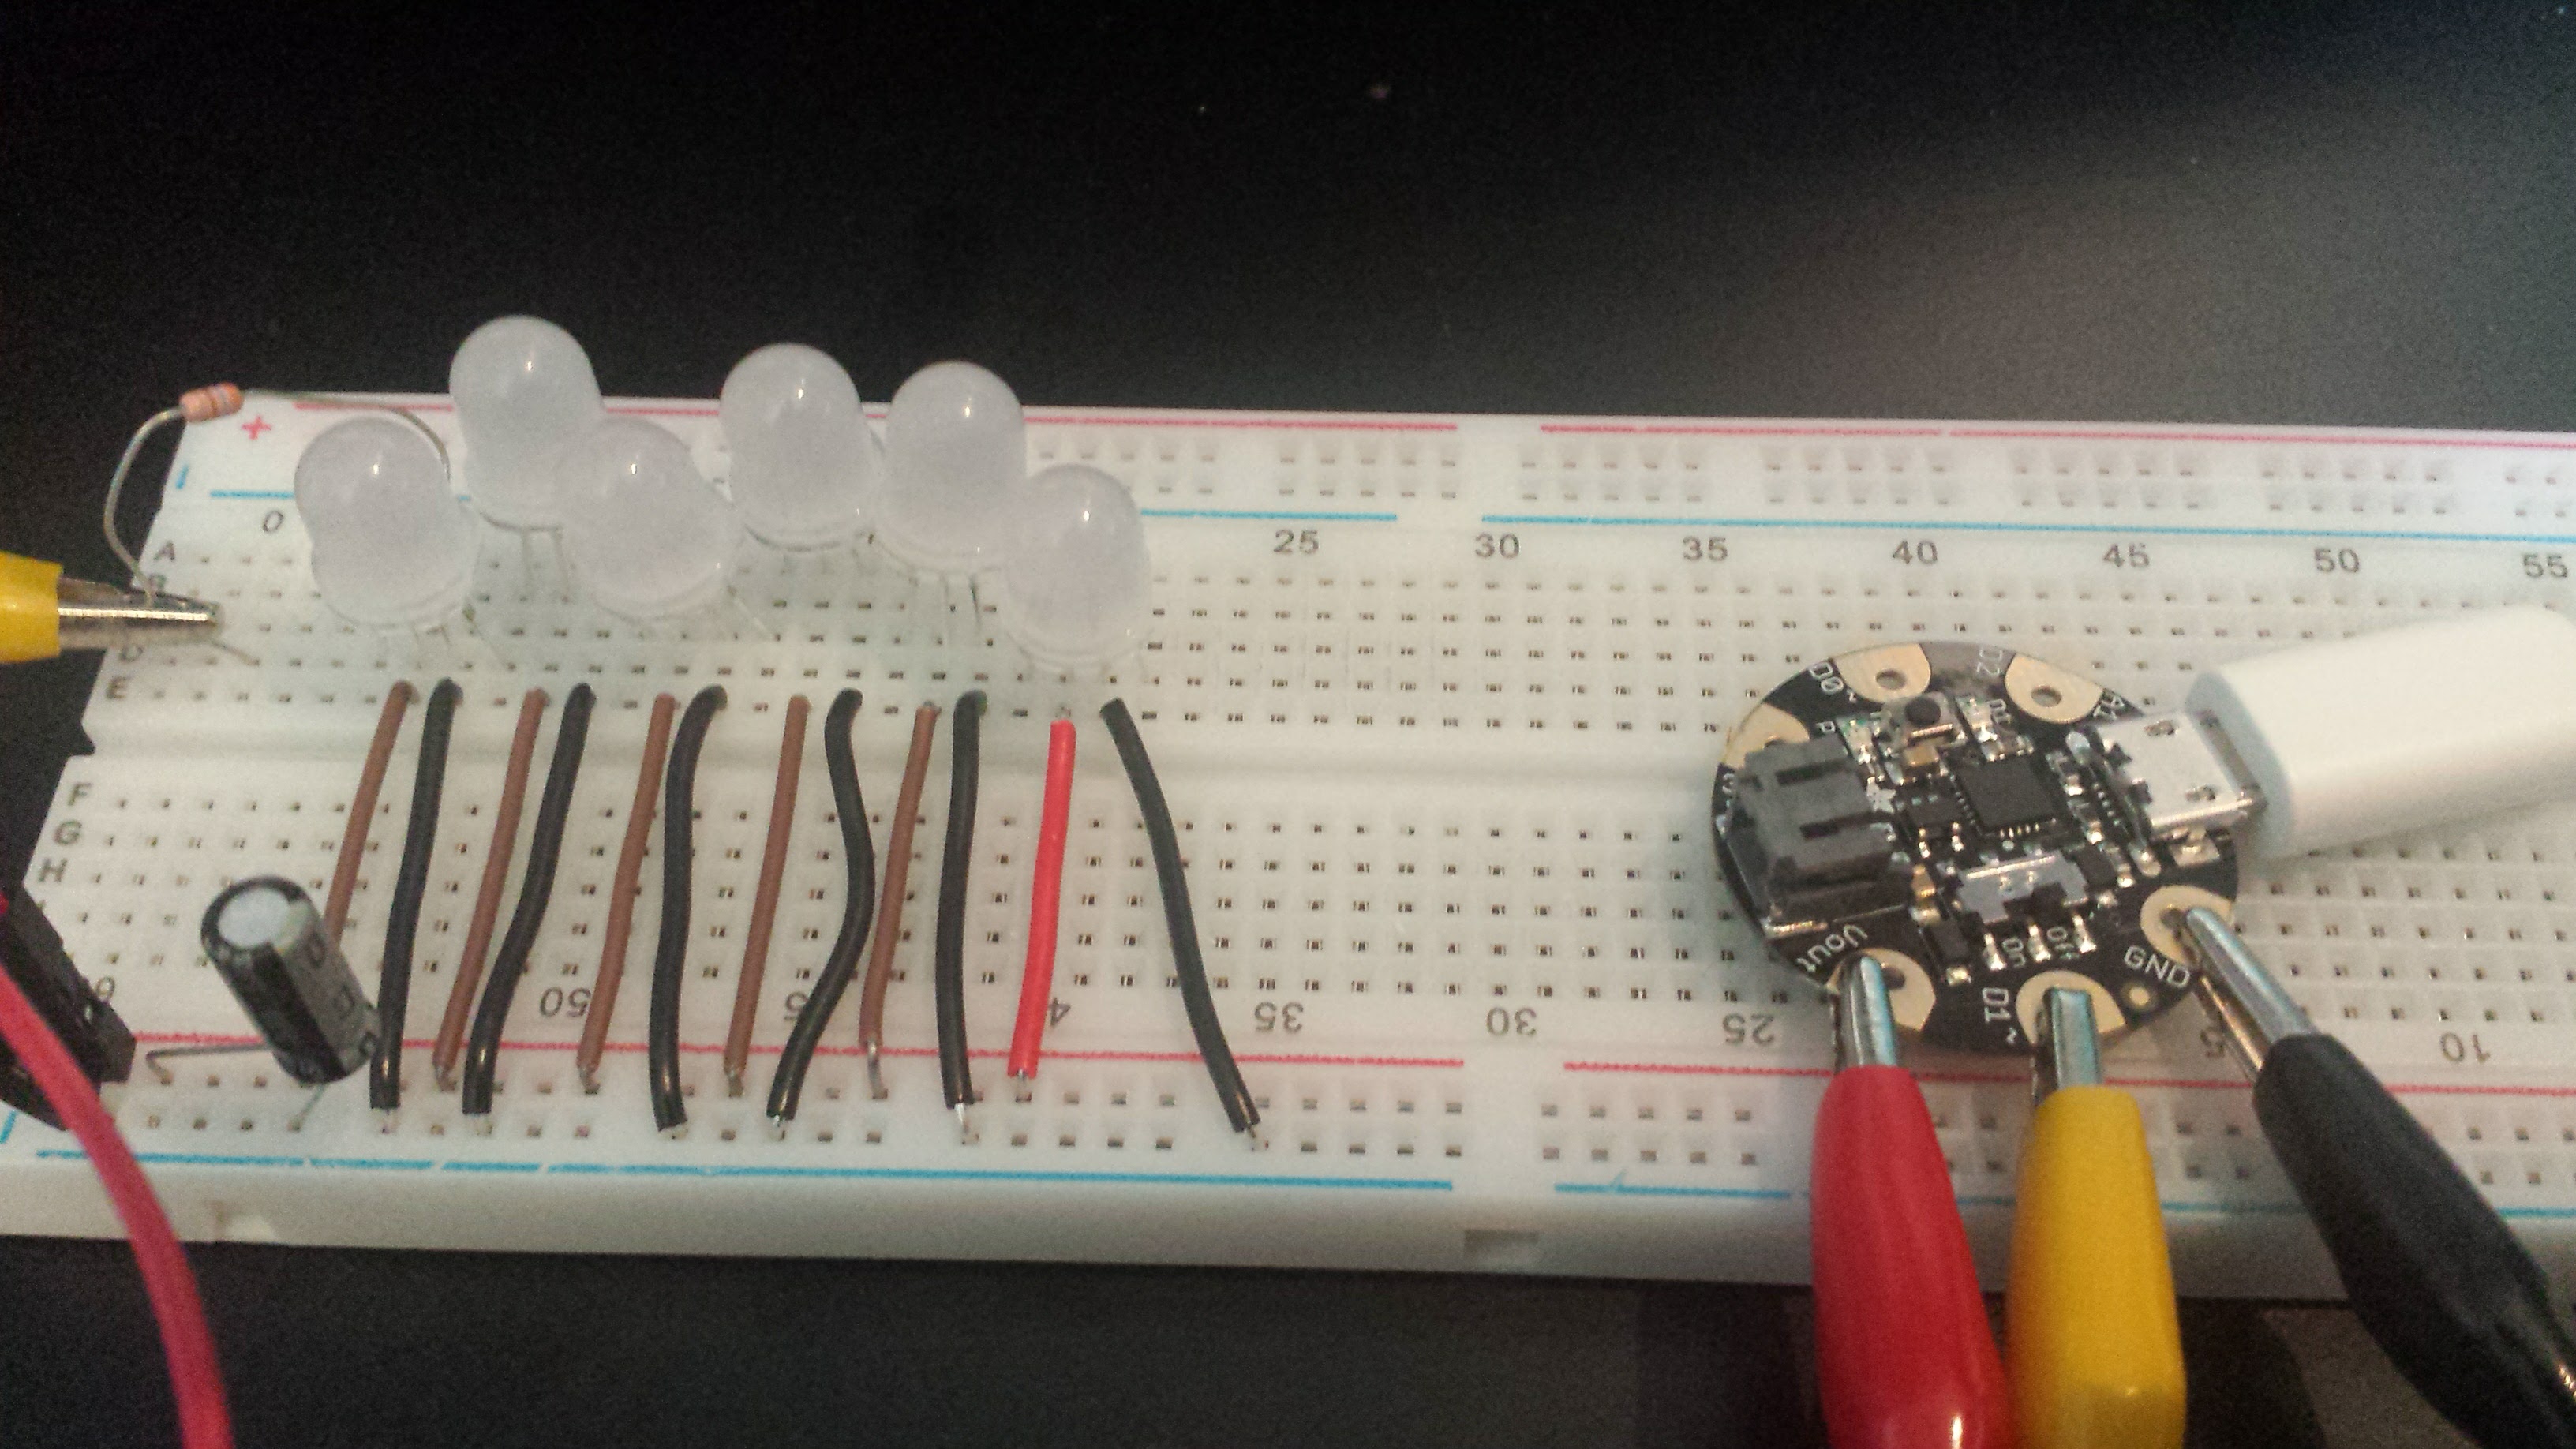 A microcontroller connected with alegator clips to a breadboard containing a capacitor and six LEDs